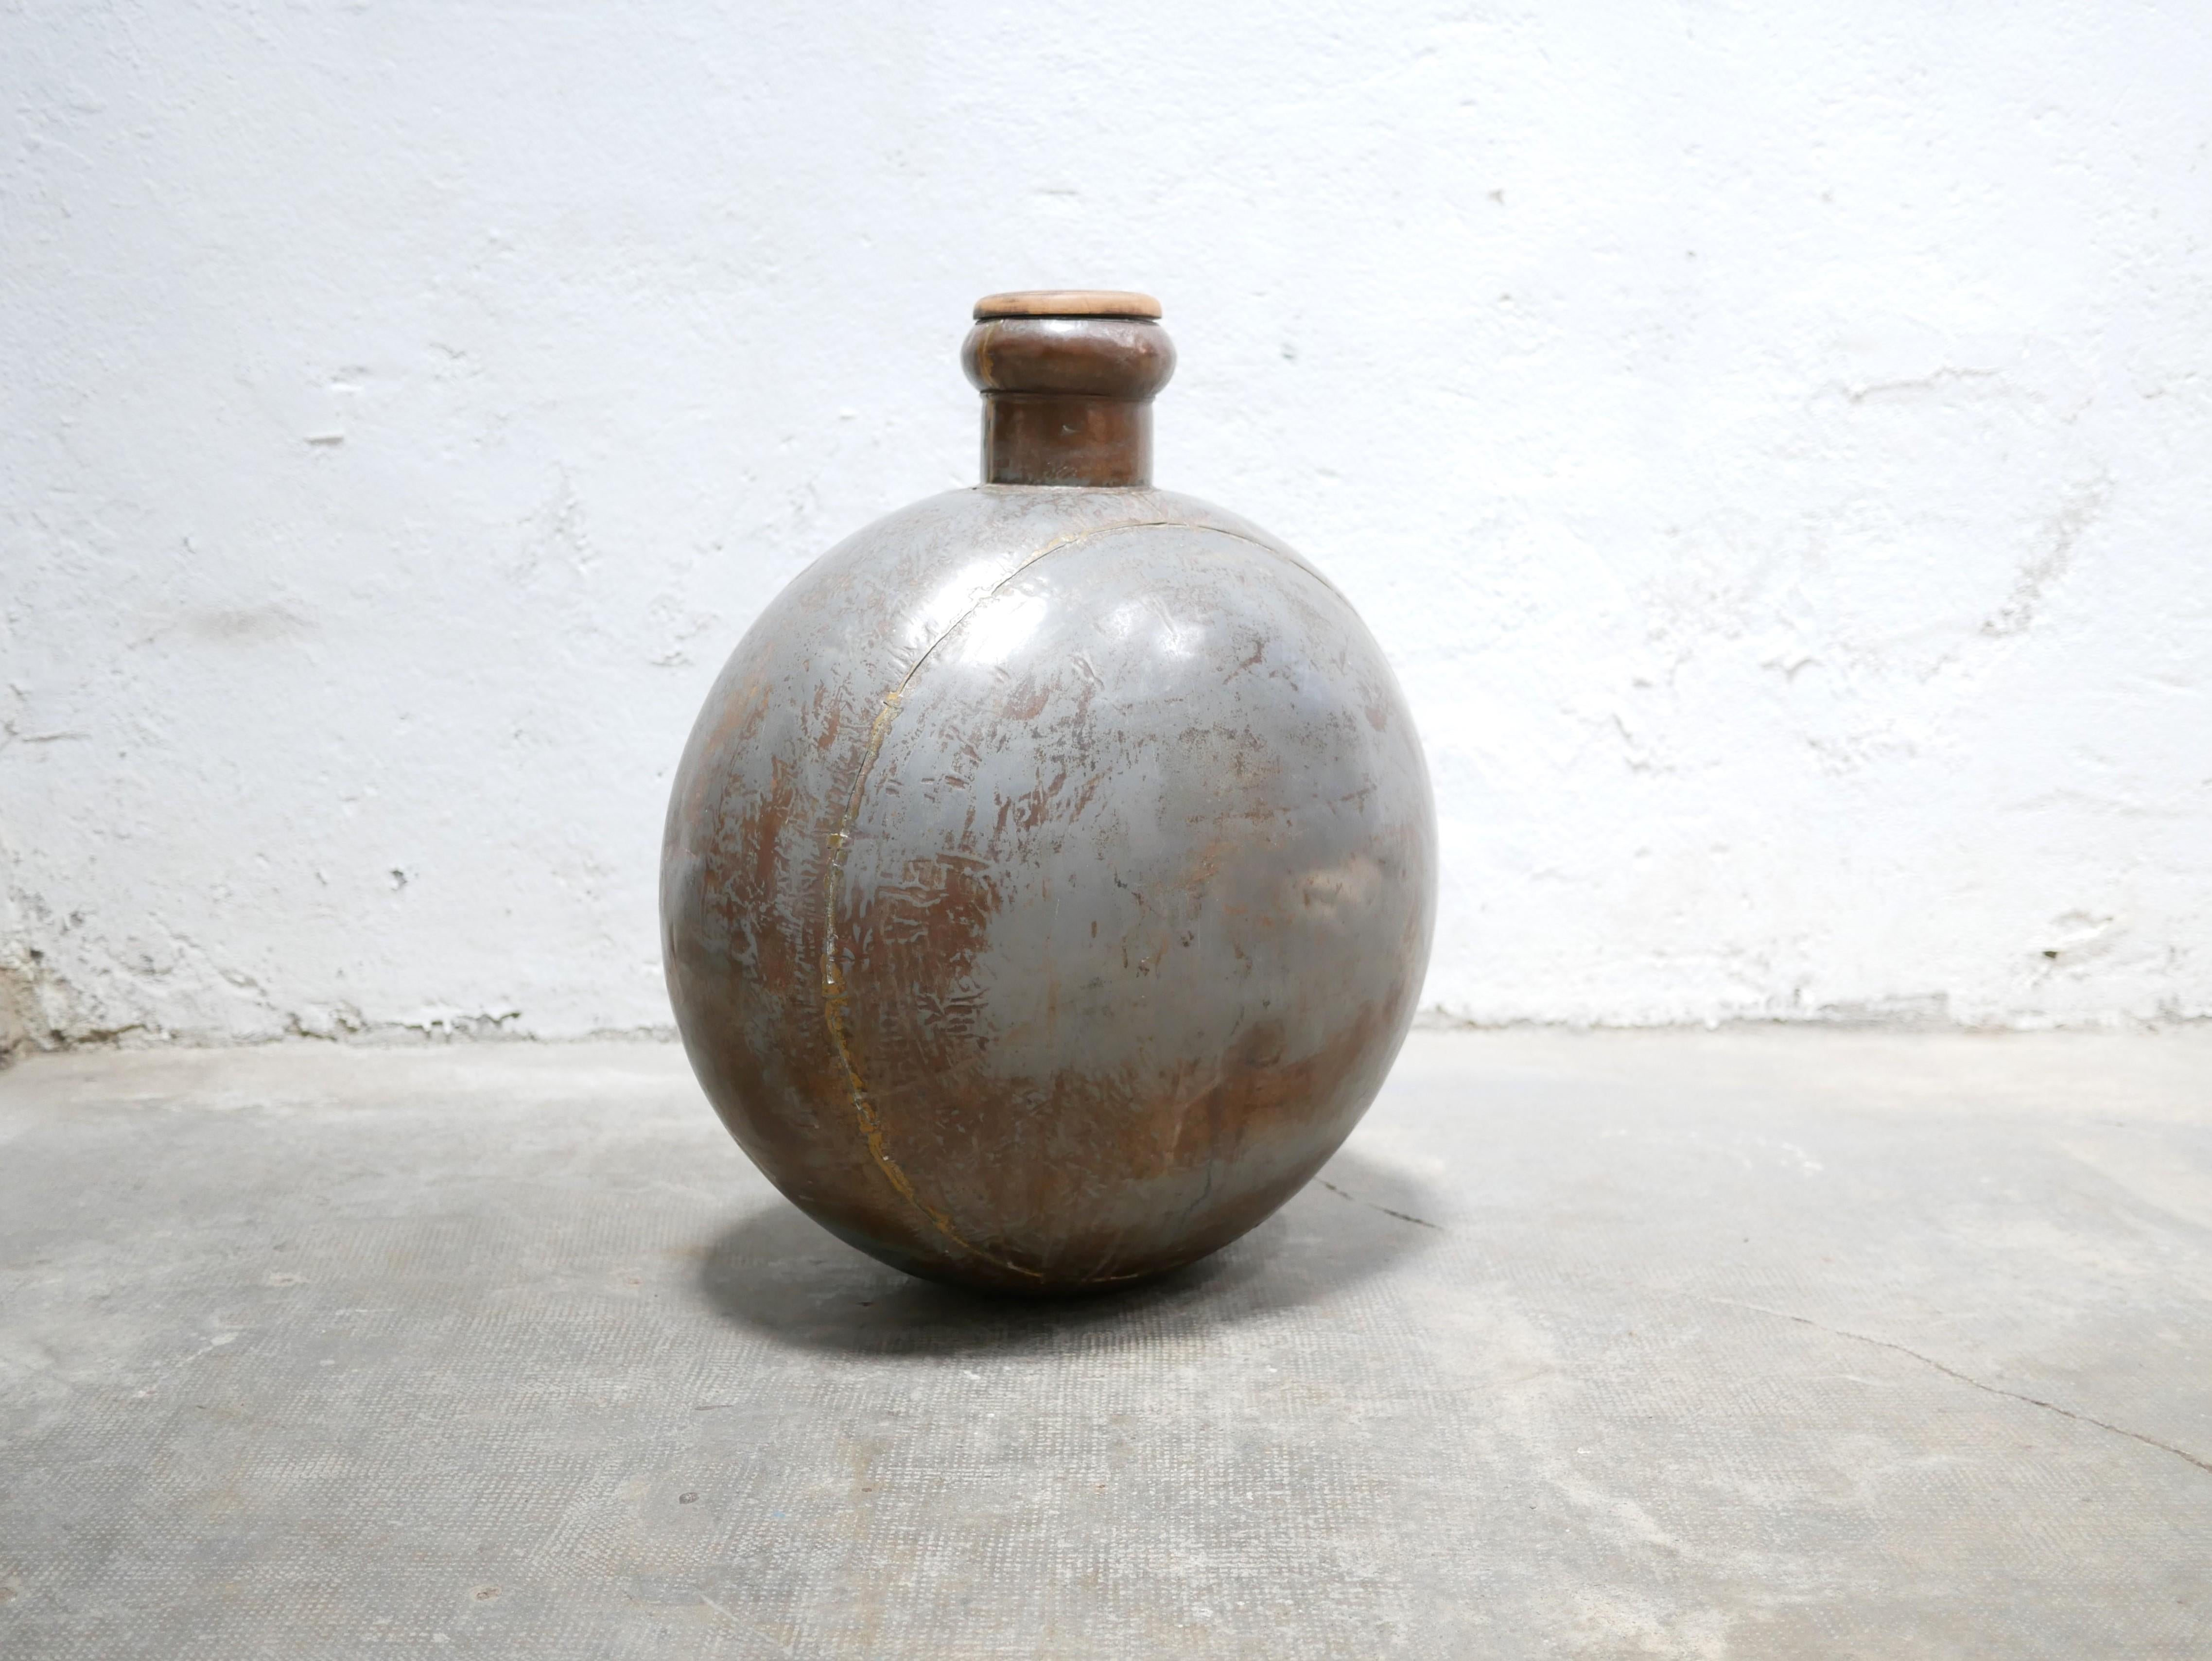 Metal water bottle designed in Rajasthan, India, early 20th century.

With its modern shape, its raw material and its pretty patina, this object is very decorative.
Placed on the floor or on a piece of furniture, it will bring a lot of character and